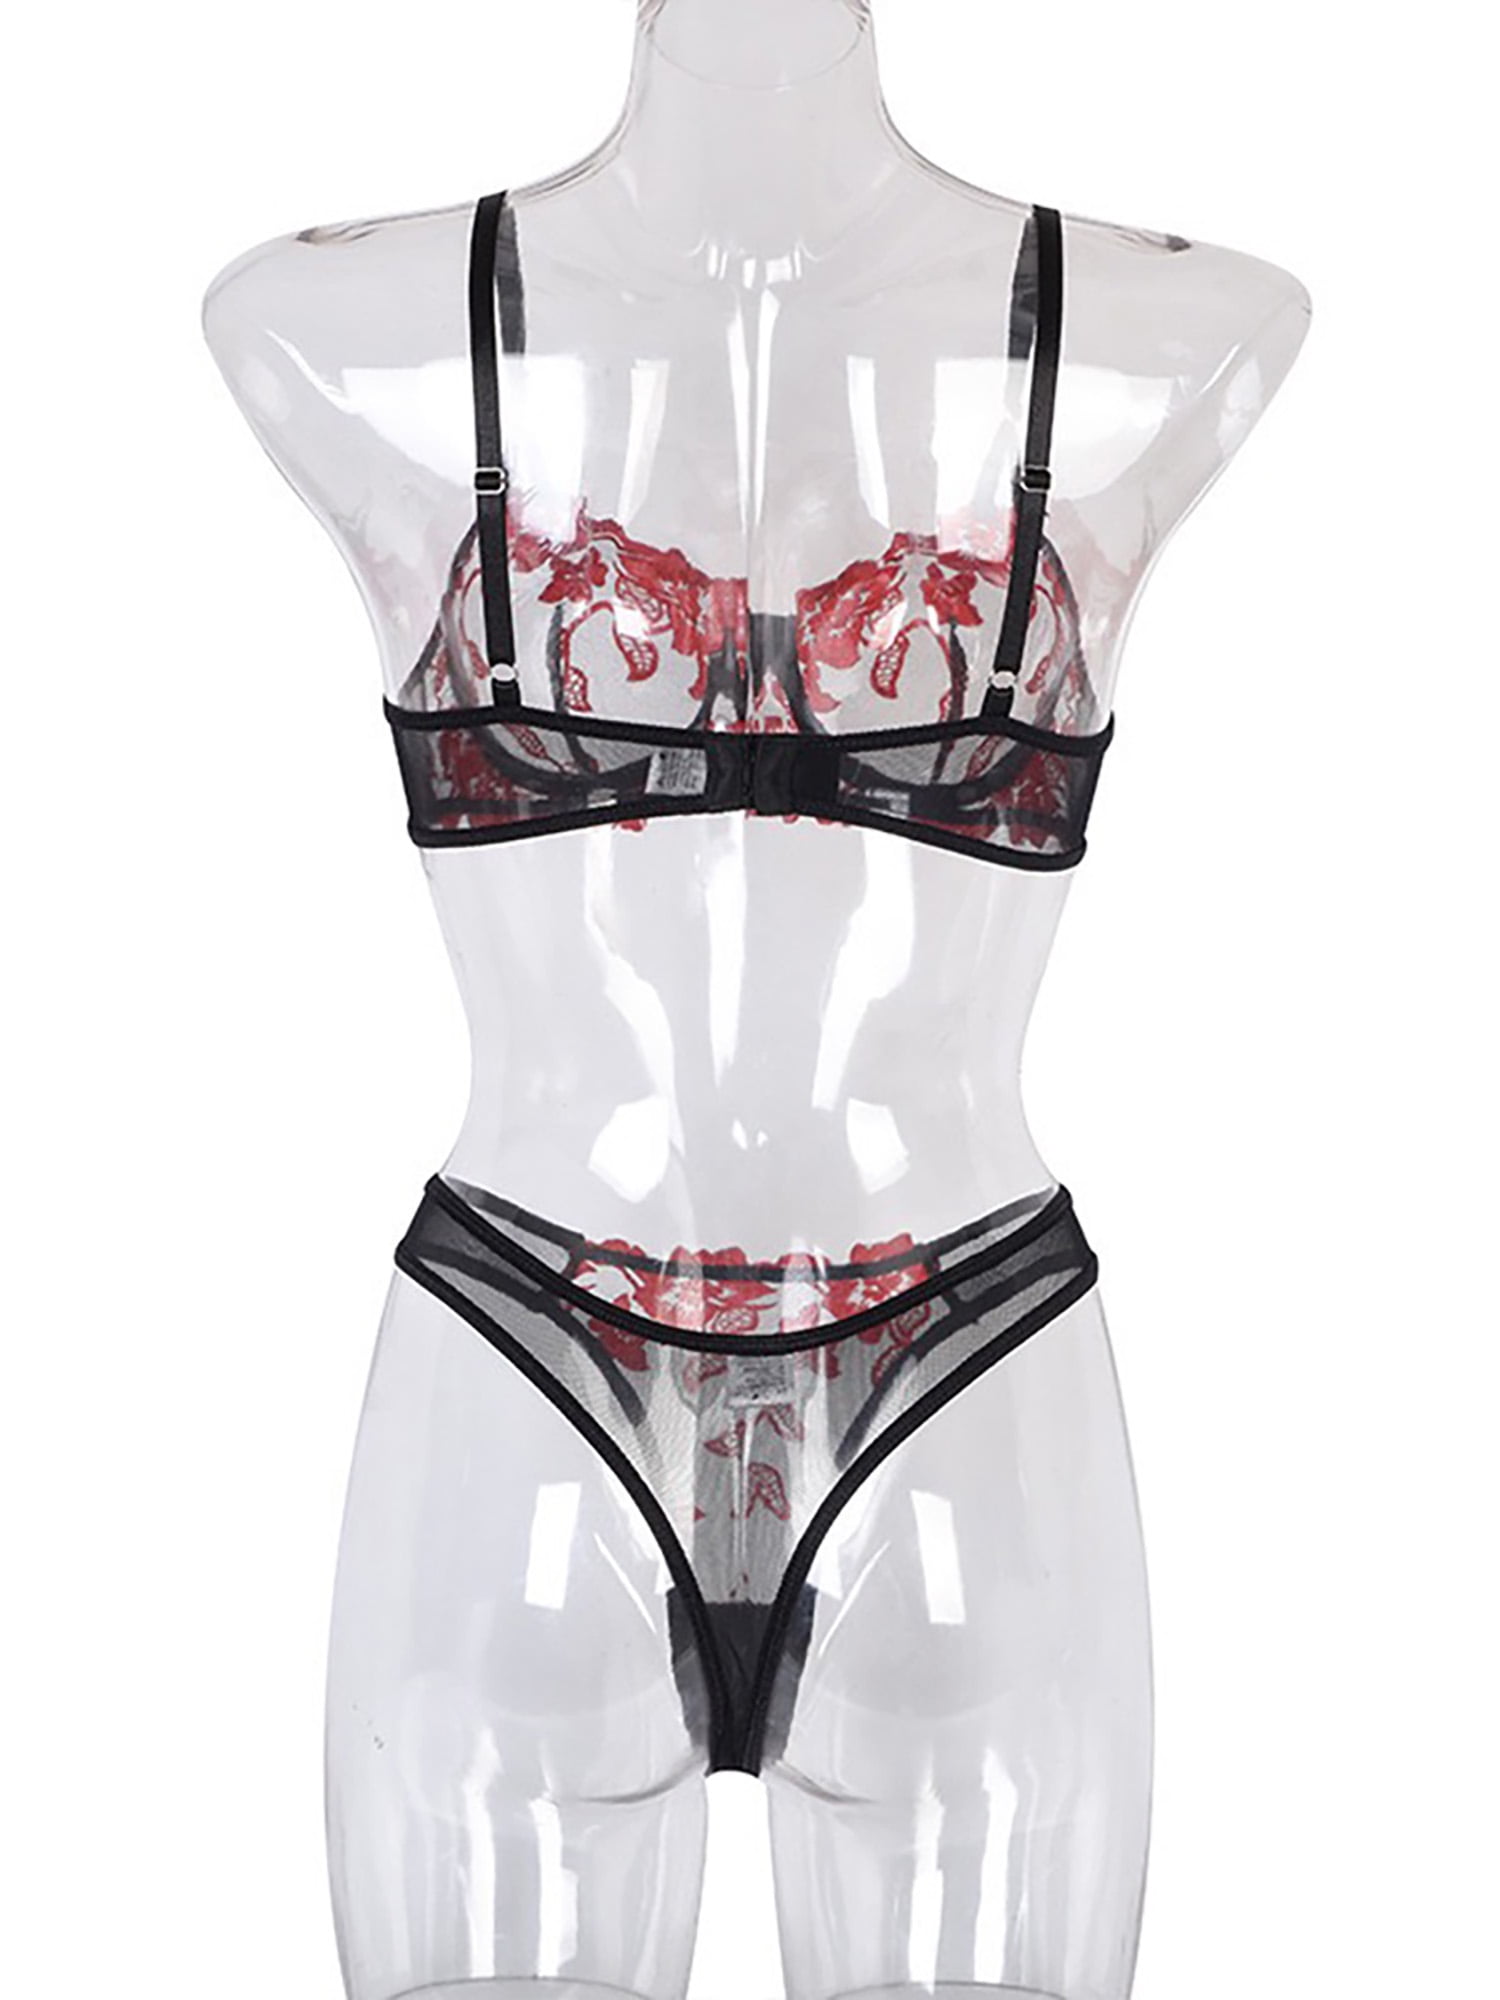 FASHIONWT Sexy Women's Embroidered Sheer Lingerie Two-Piece Bra Set